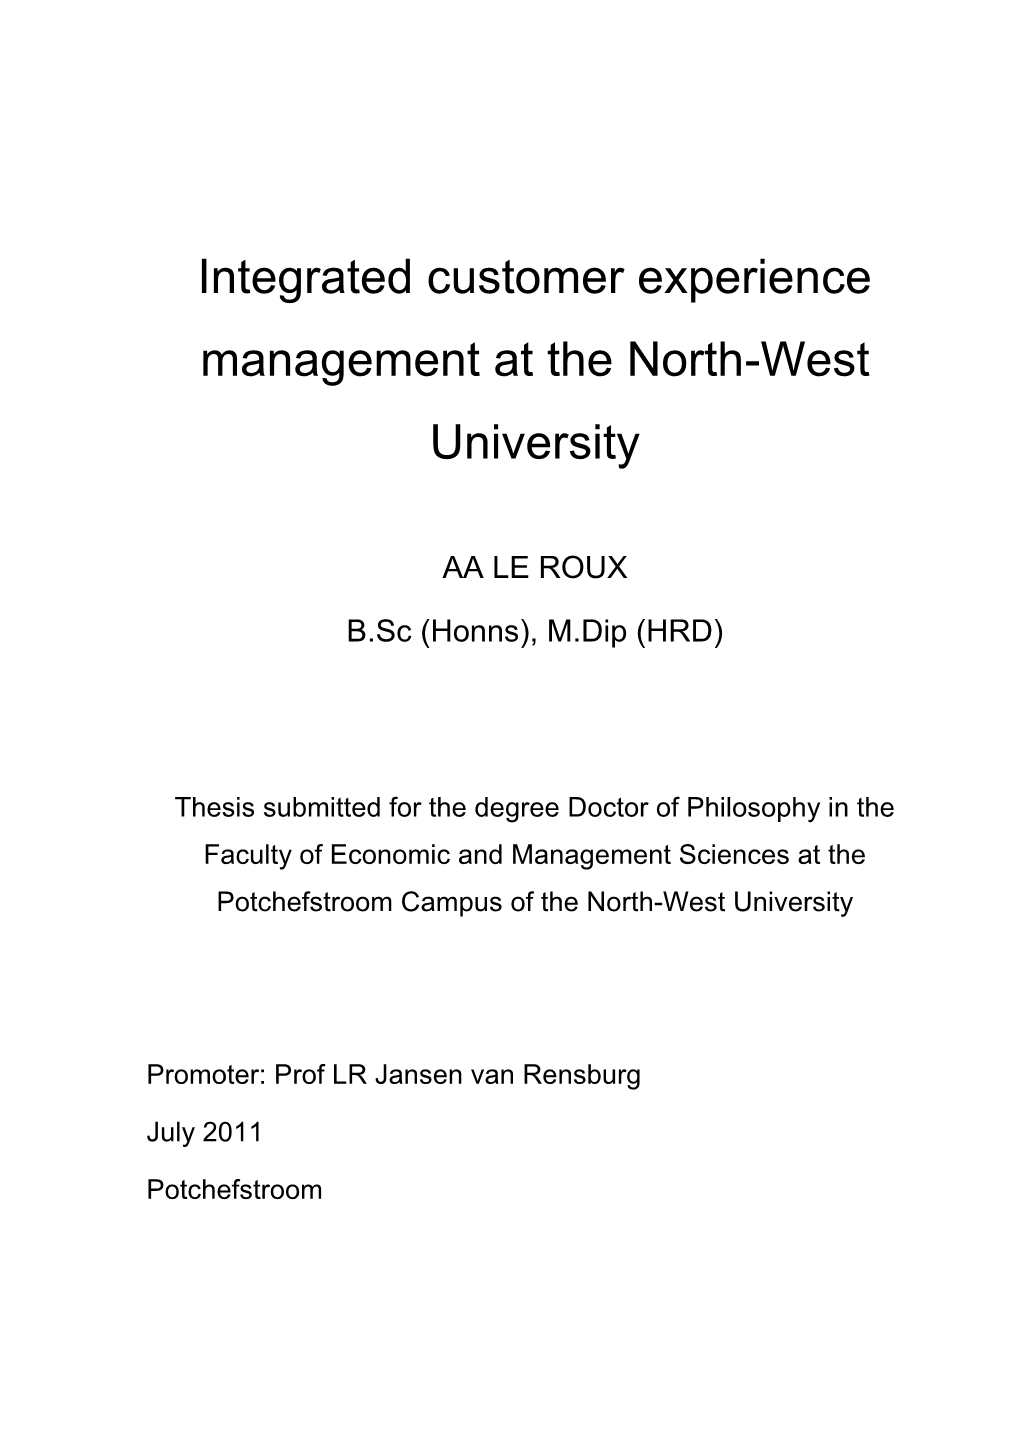 Integrated Customer Experience Management at the North-West University